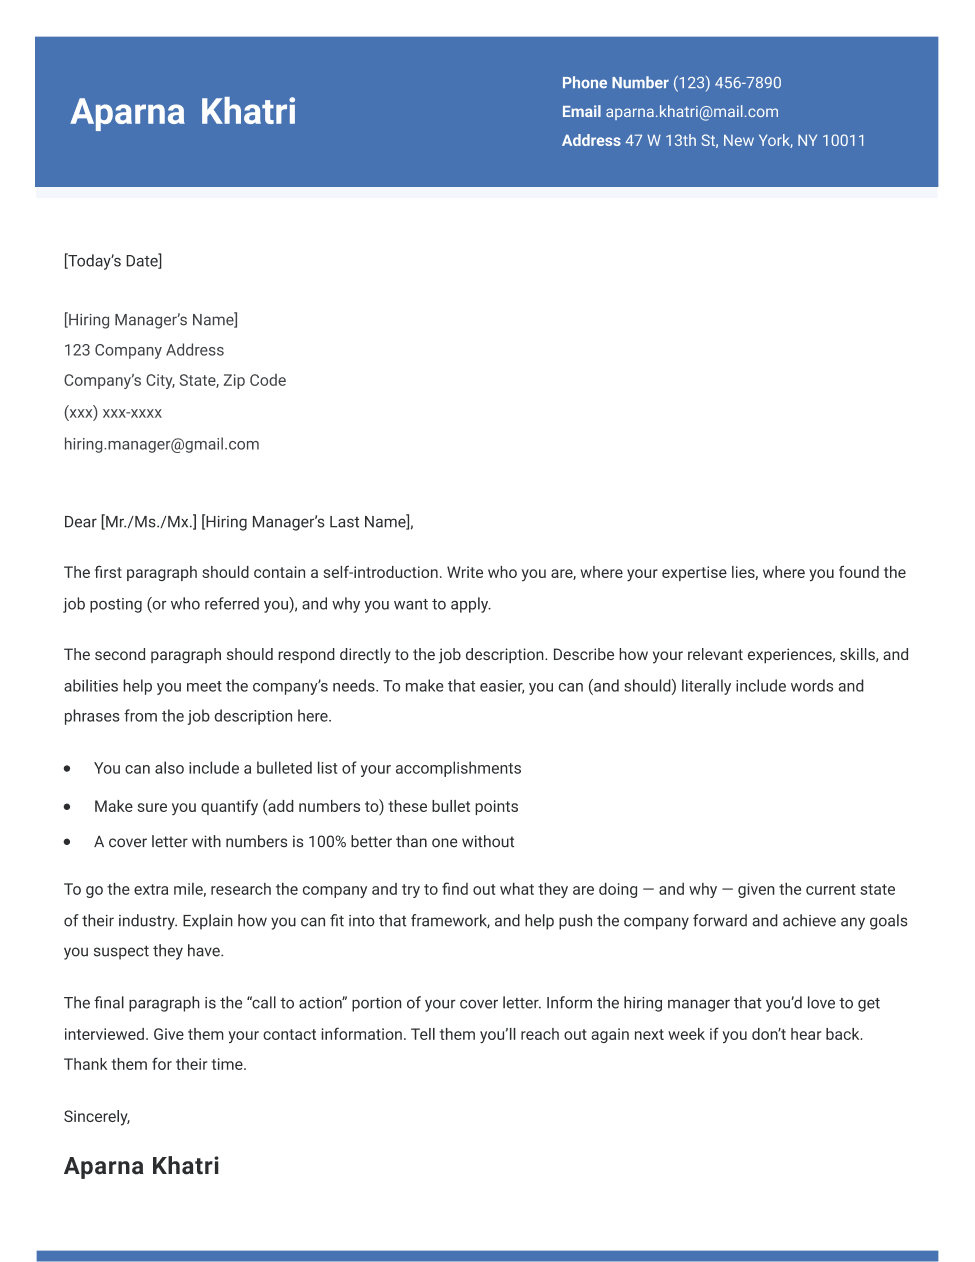 Pantheon cover letter template in navy blue, with a full color header that includes the contact information.